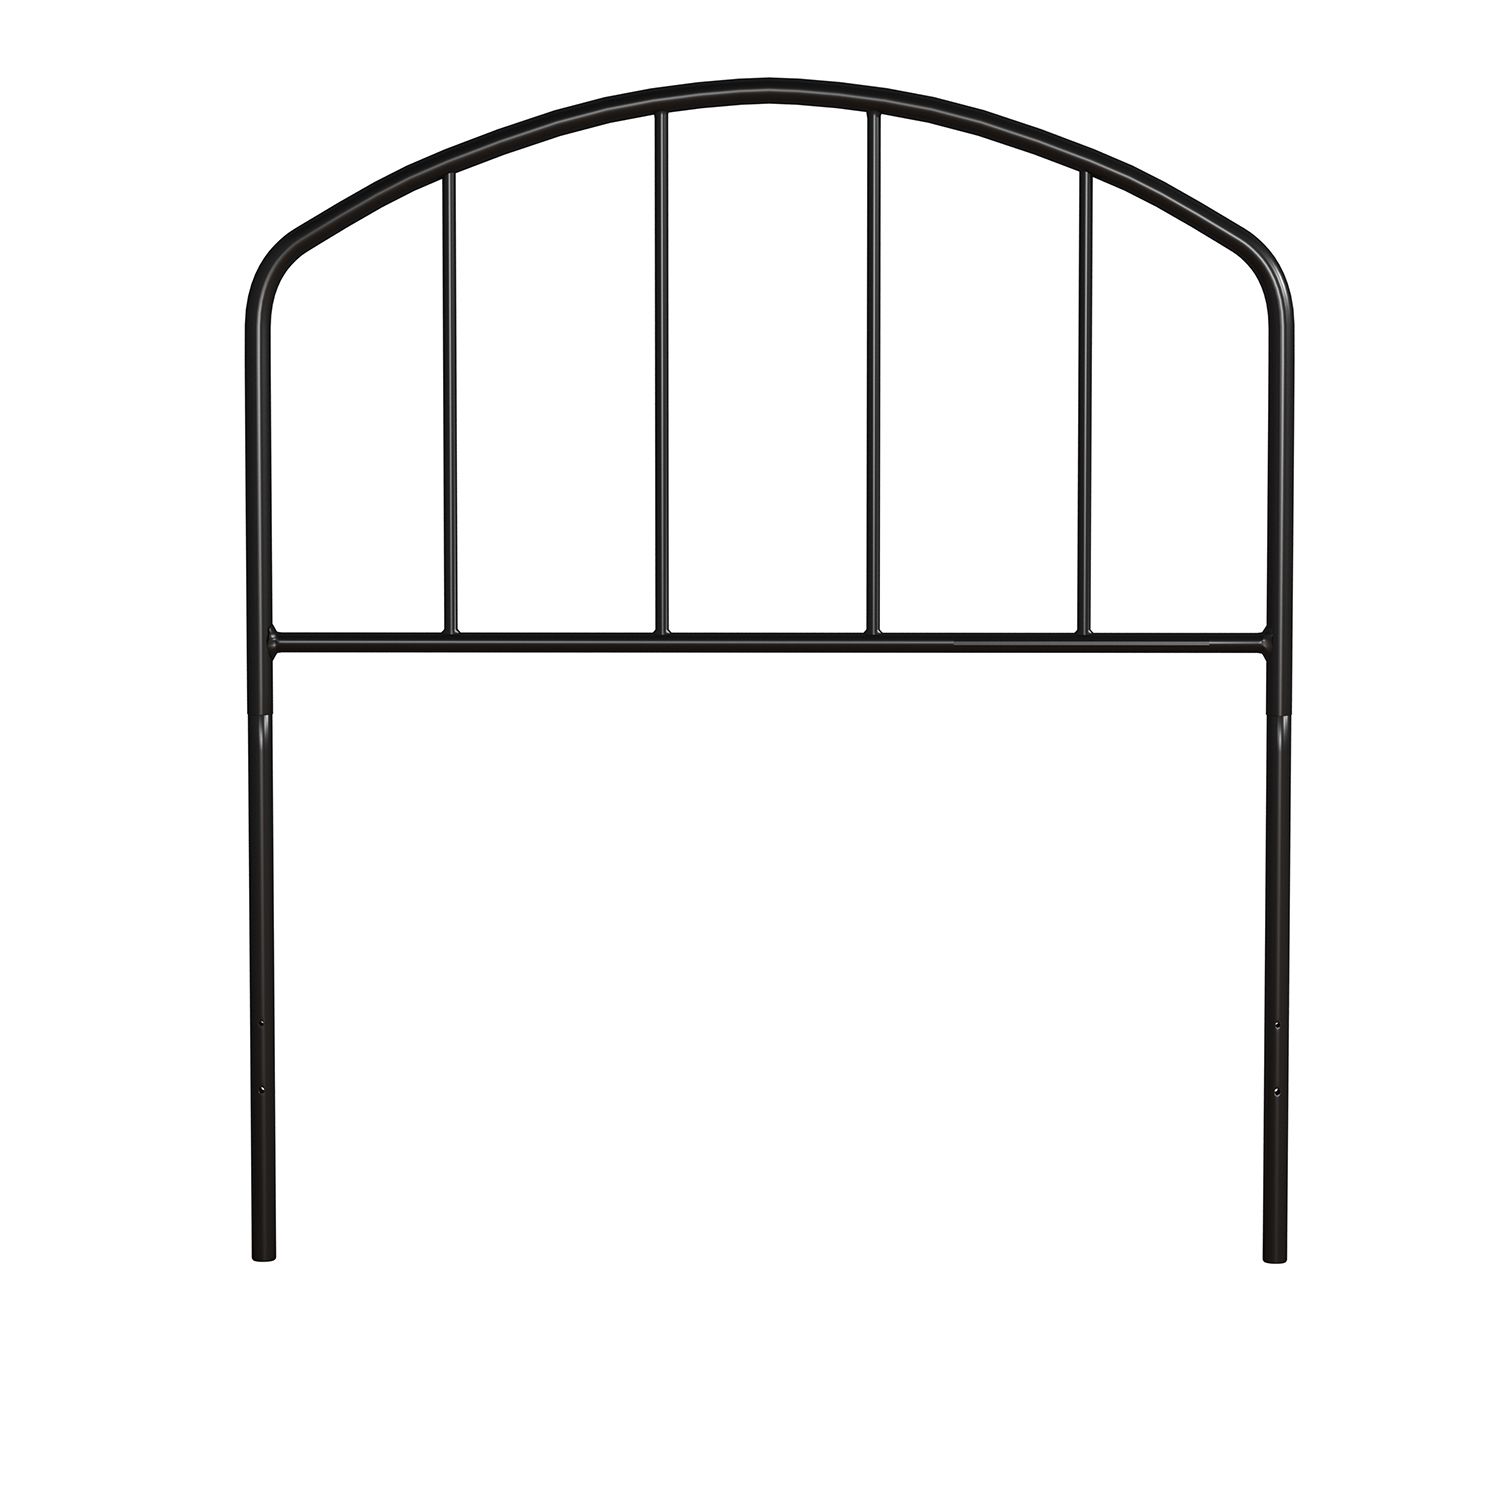 Image for Hillsdale Furniture Tolland Arched Headboard at Kohl's.